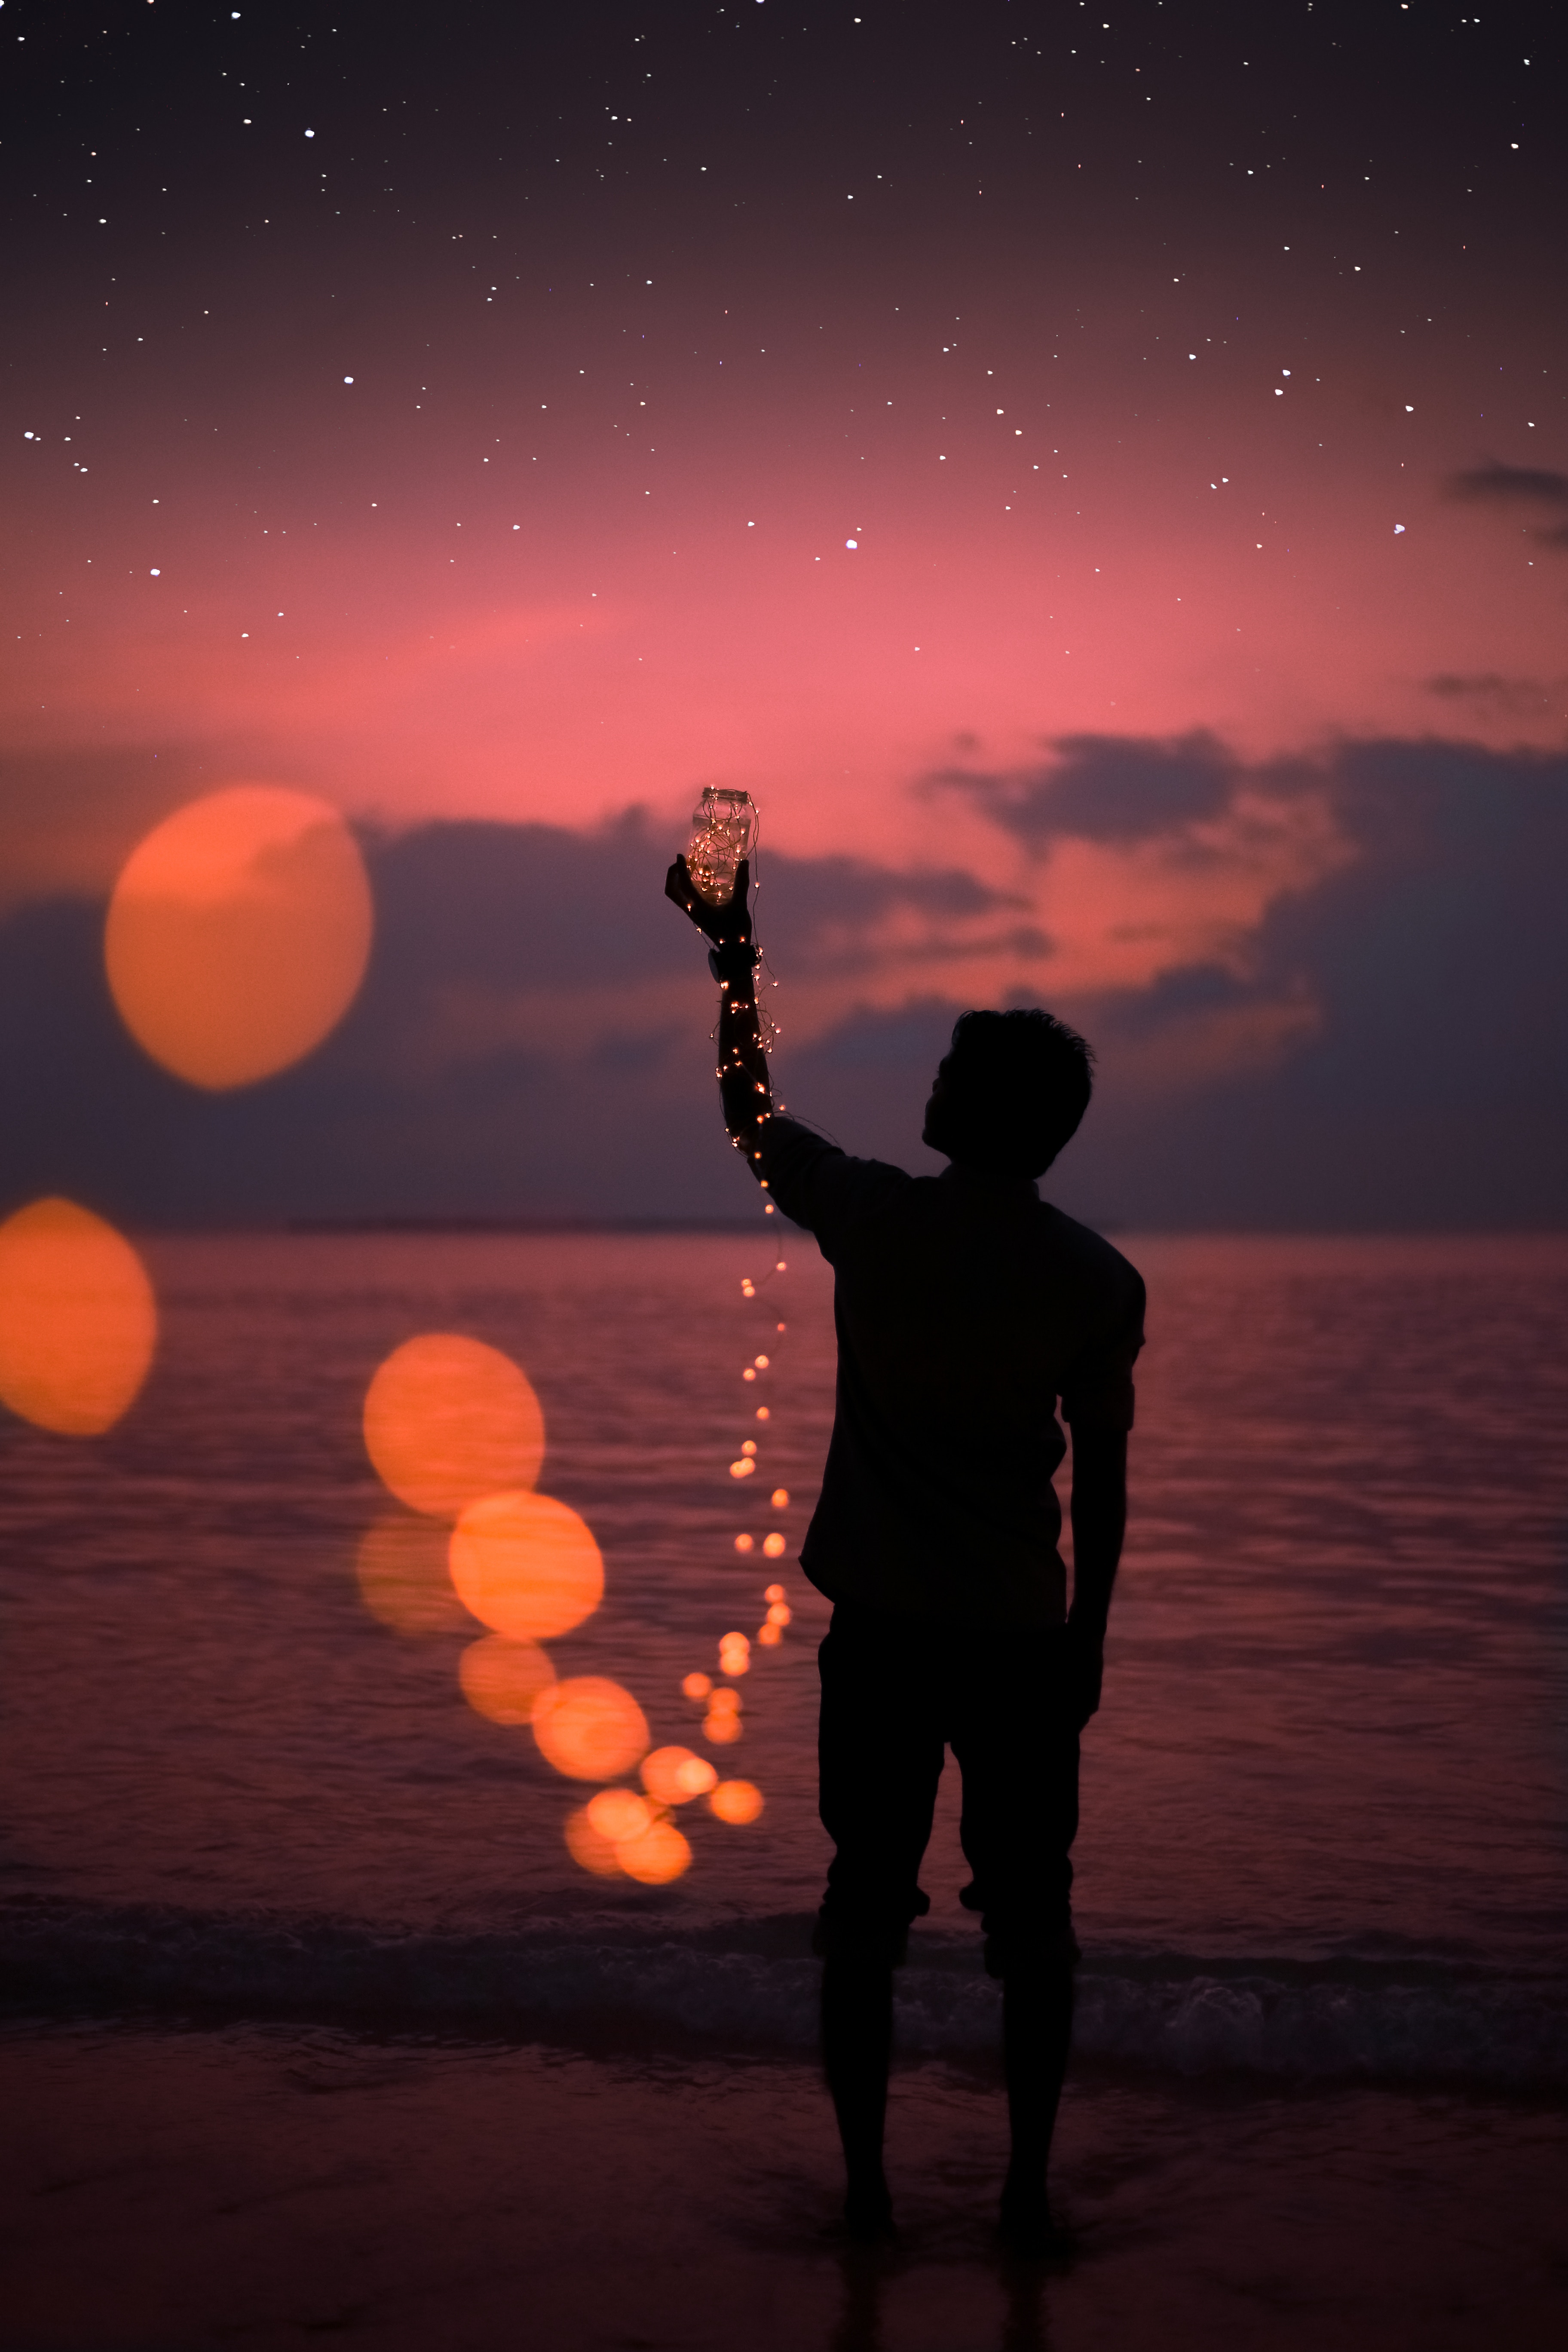 103461 download wallpaper human, dark, sea, stars, shore, bank, glare, silhouette, jar, person screensavers and pictures for free